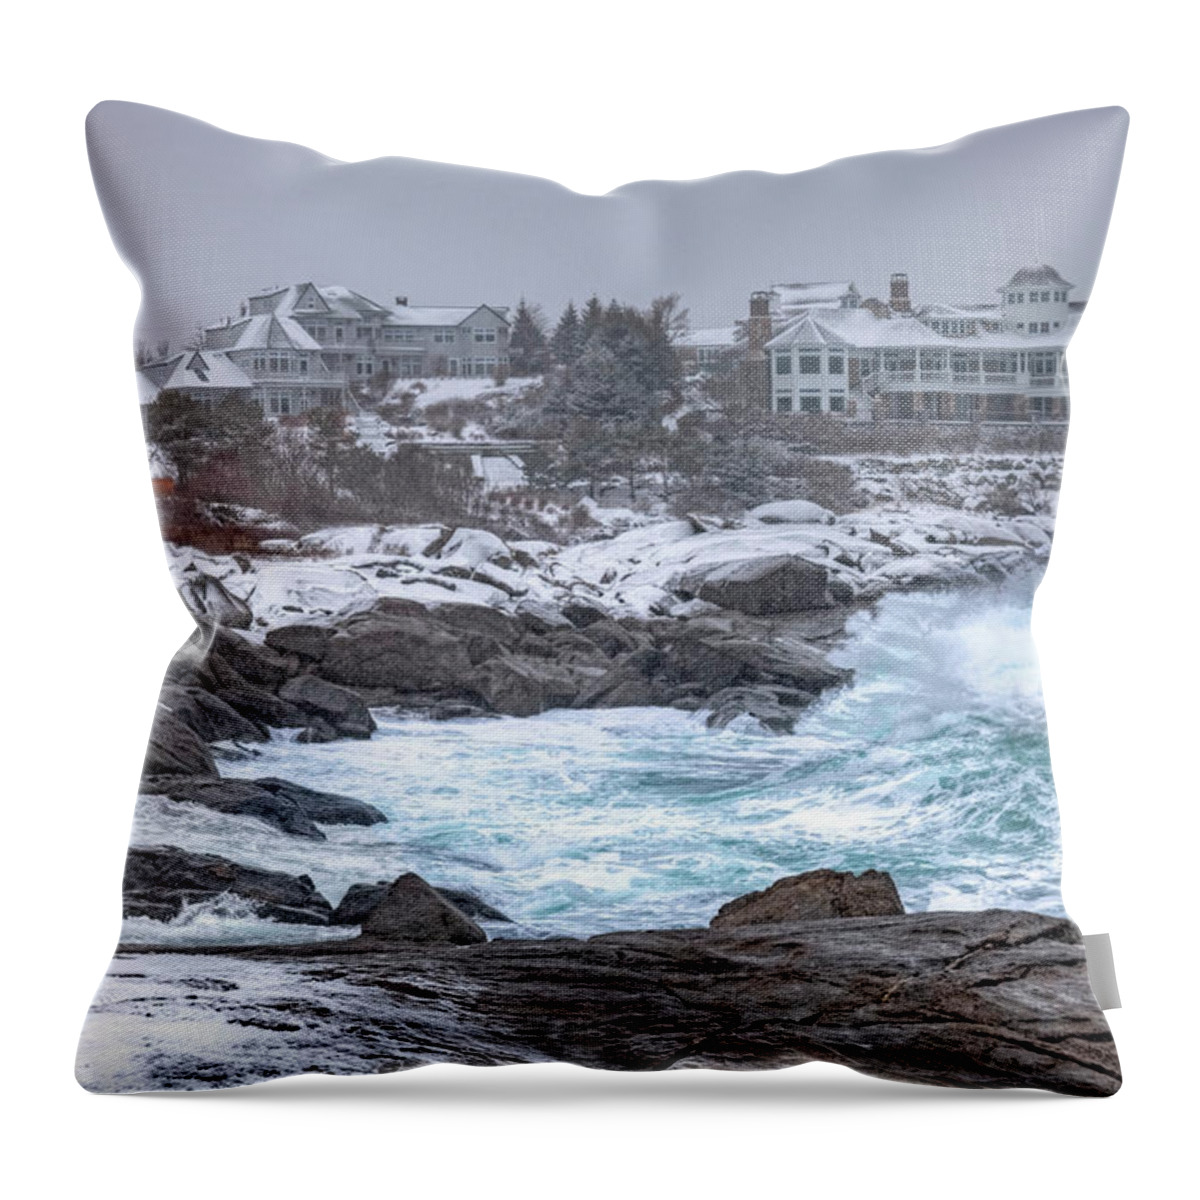 Water's Edge Throw Pillow featuring the photograph Coastal Storm by Denistangneyjr